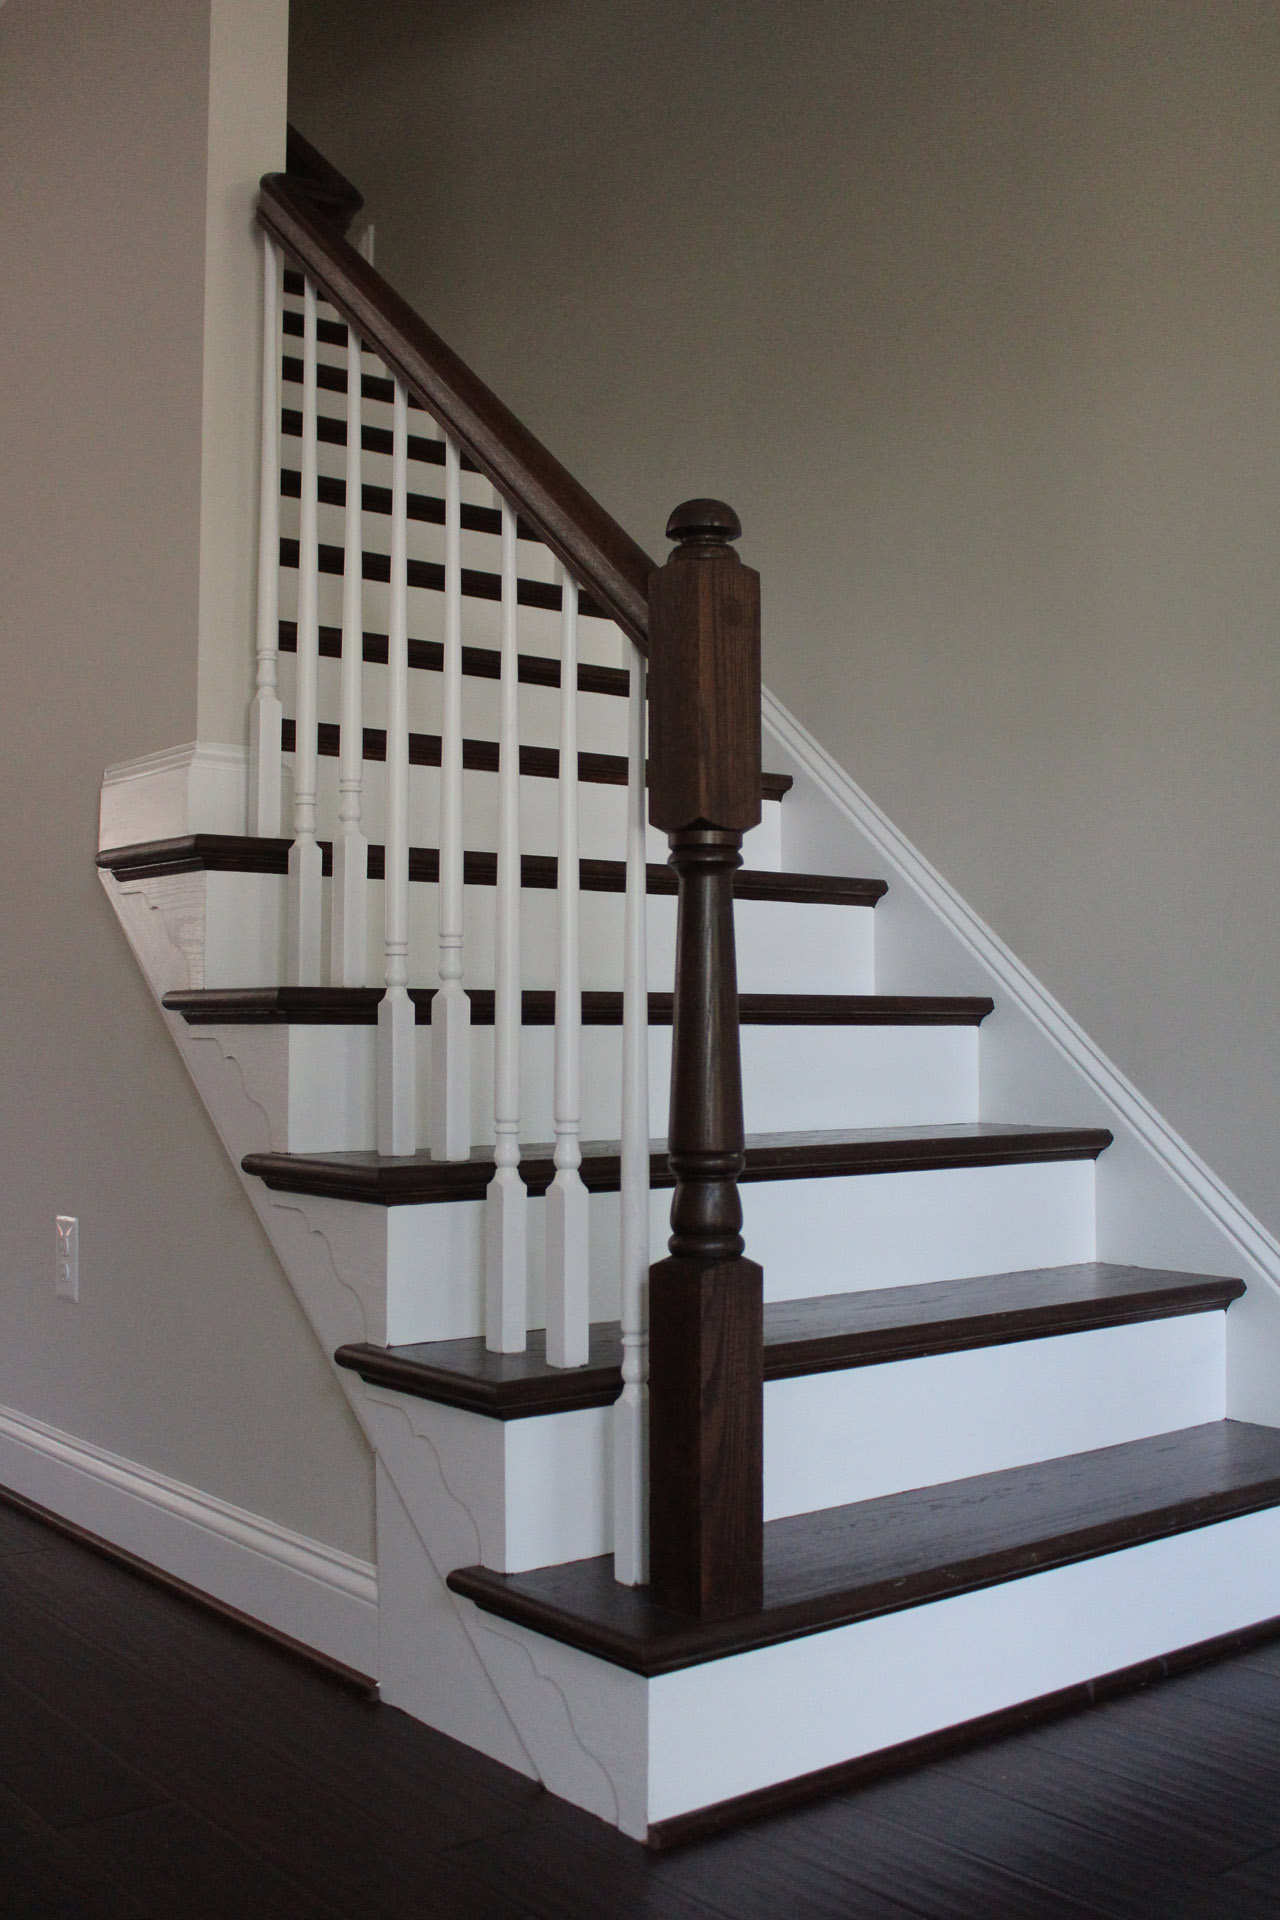 This showcases a completed loudoun stairs project within a home in northern virginia. This showcases the rails that they handmade. 